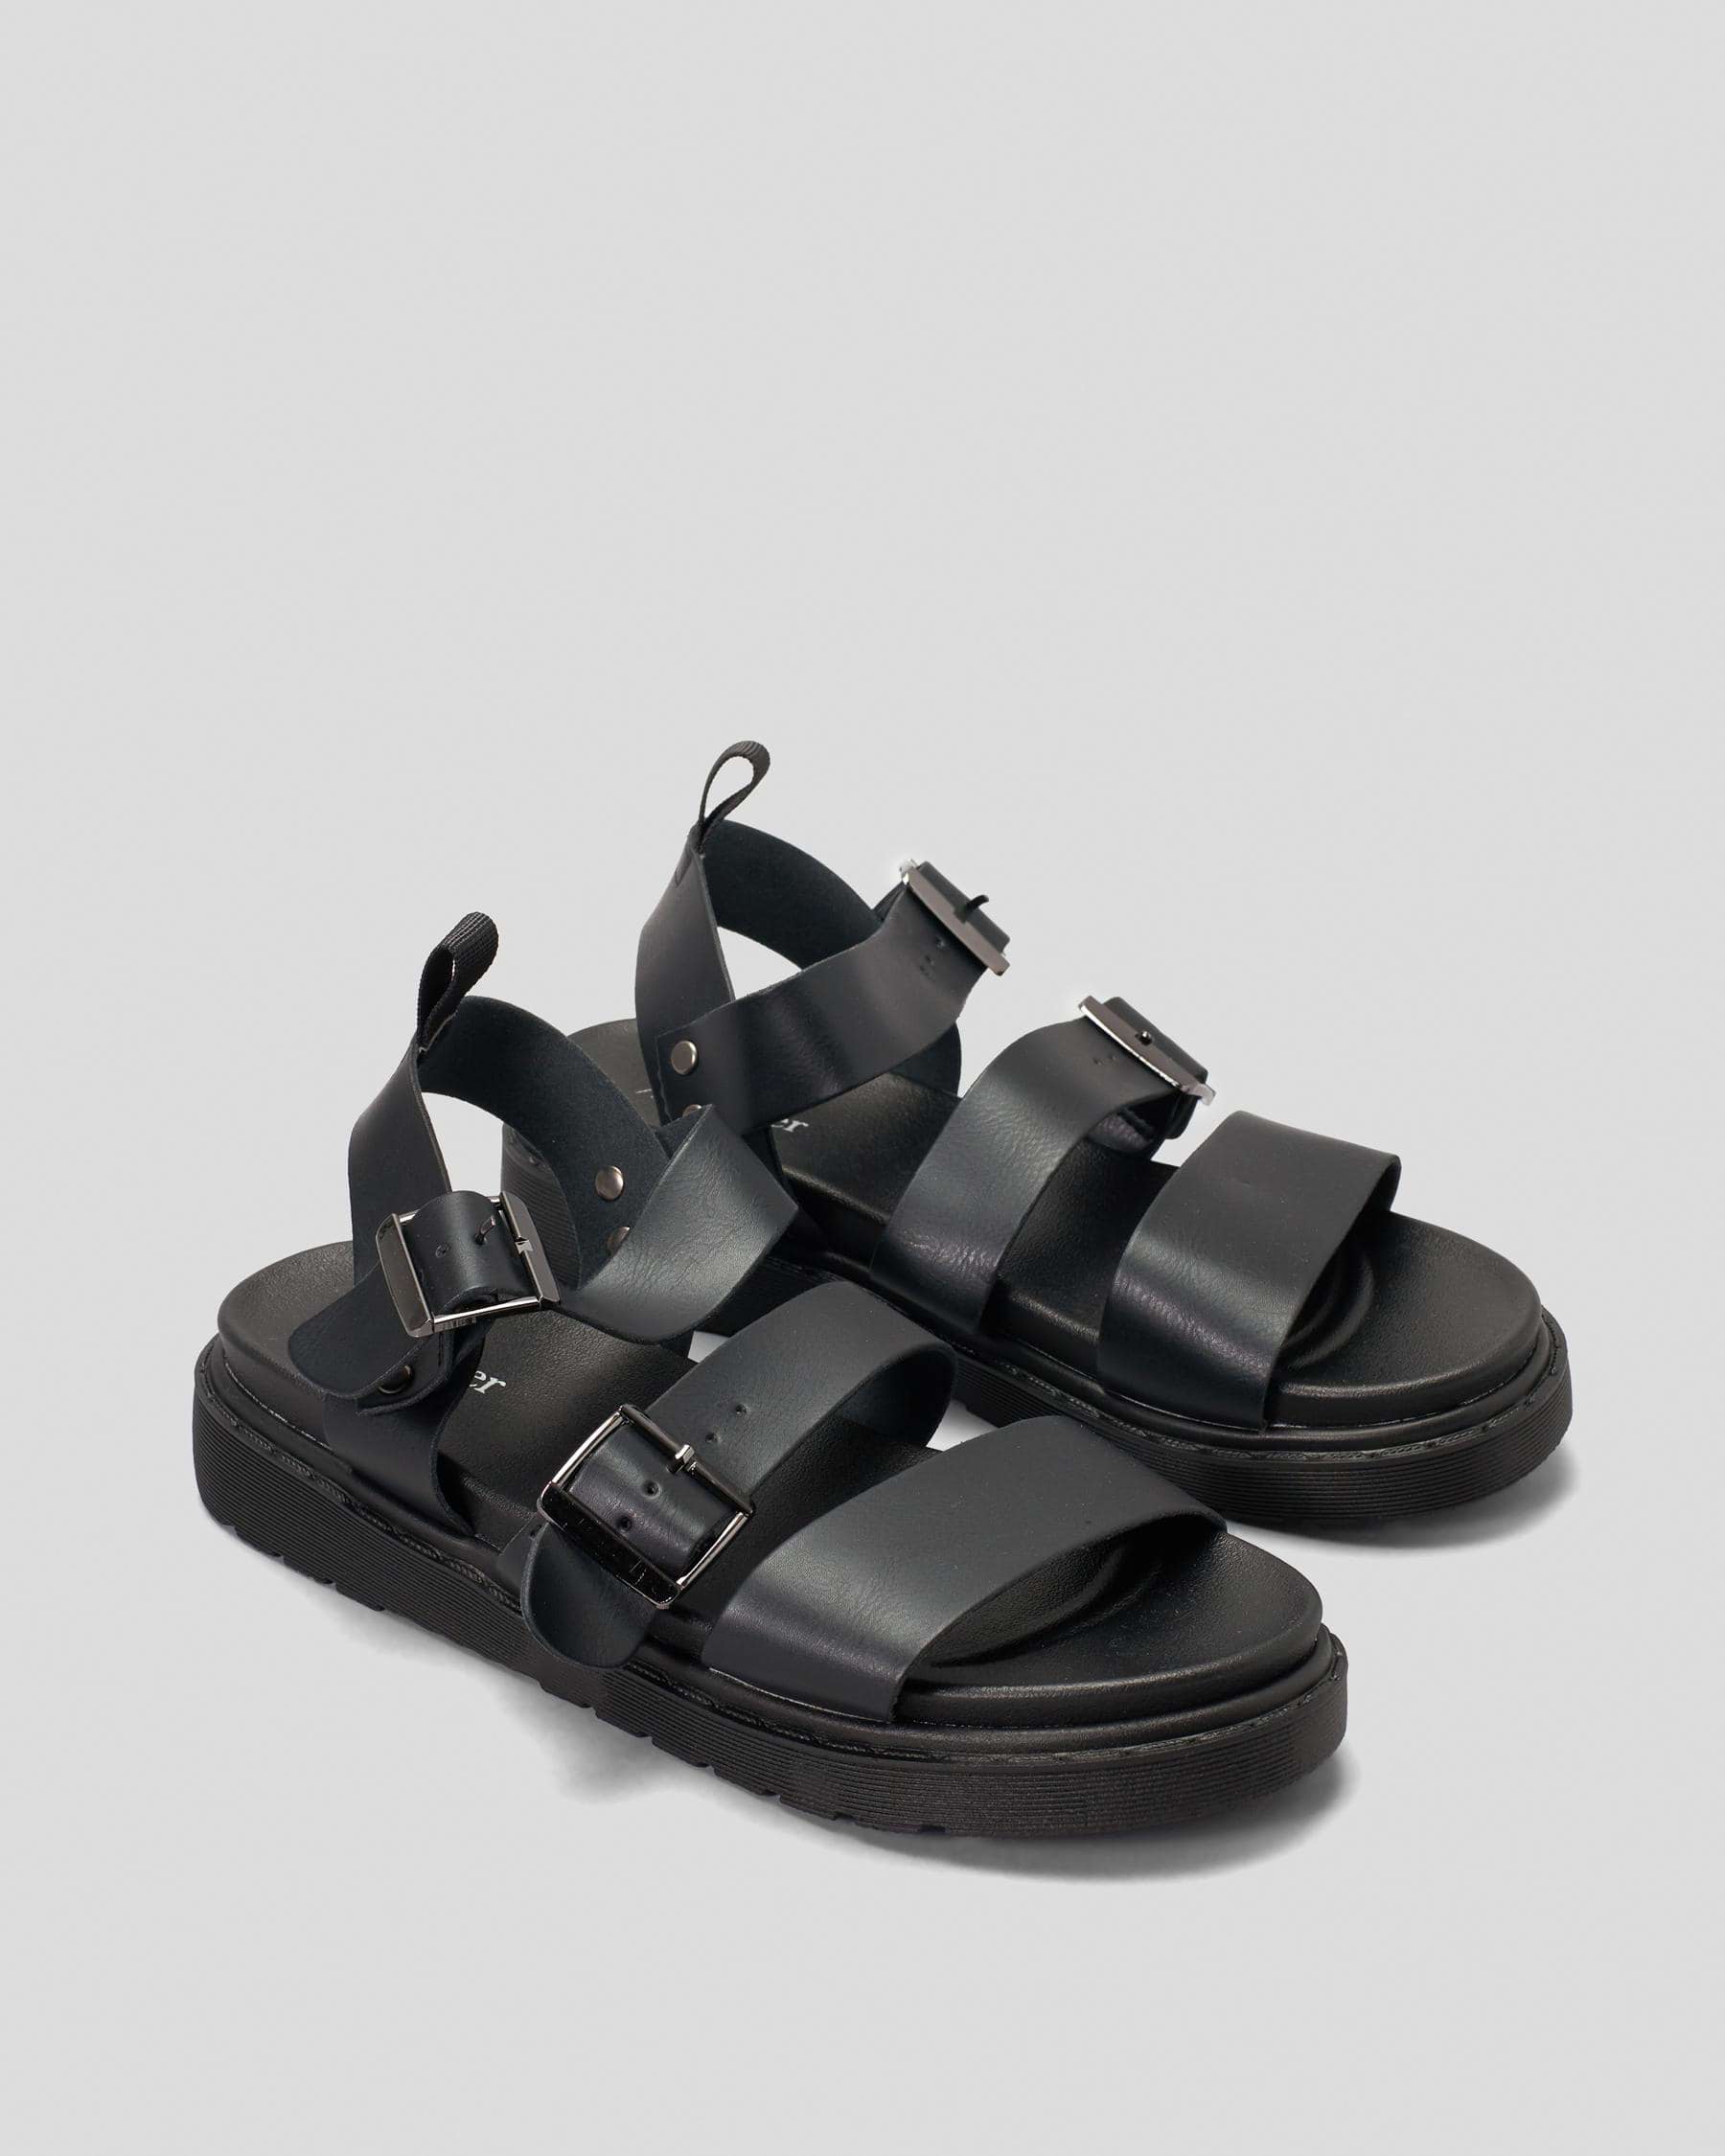 Ava And Ever Pria Sandals In Black - Fast Shipping & Easy Returns ...